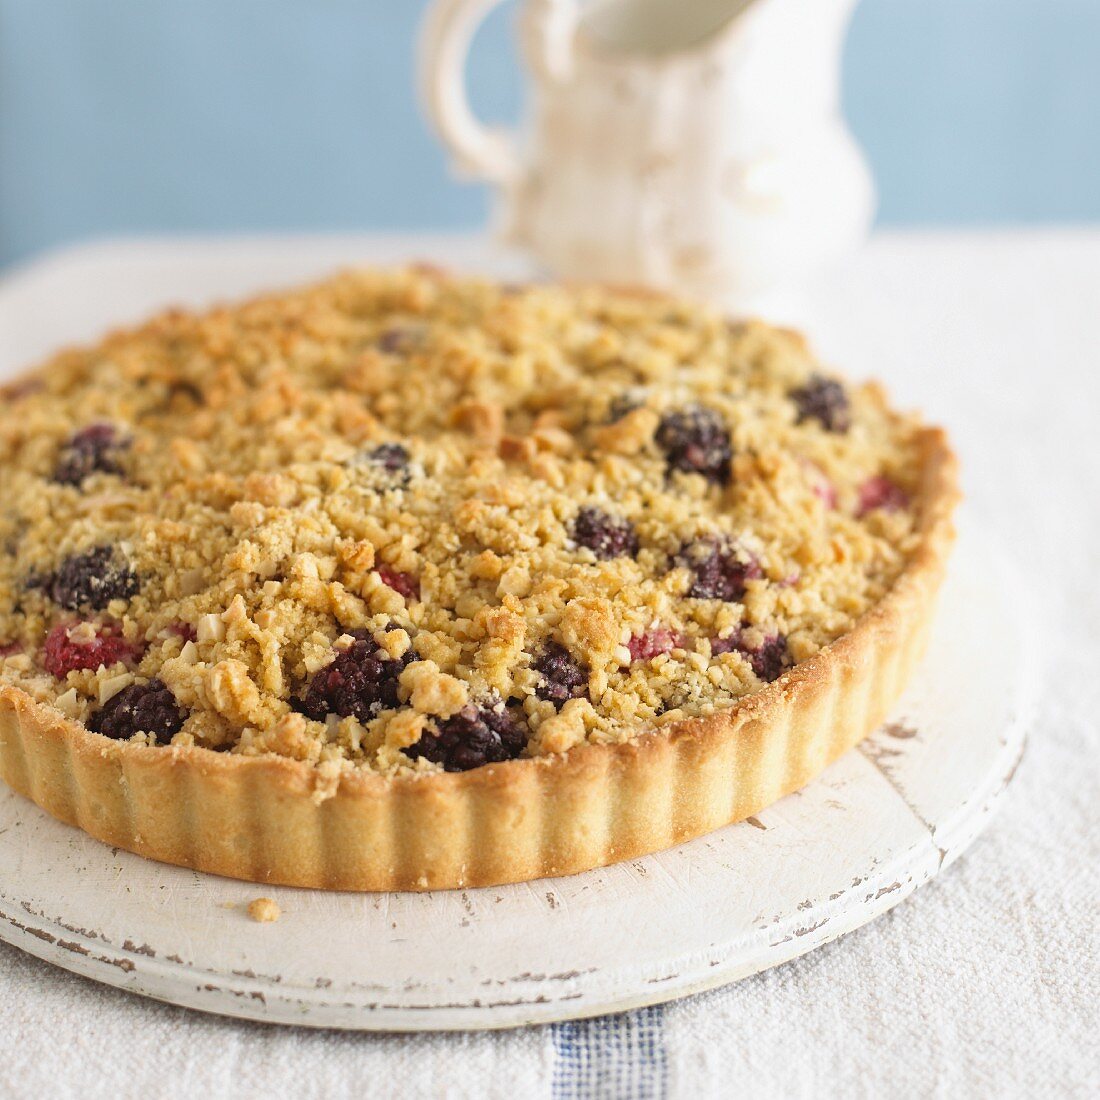 A whole boysenberry-apple tart with streusel topping